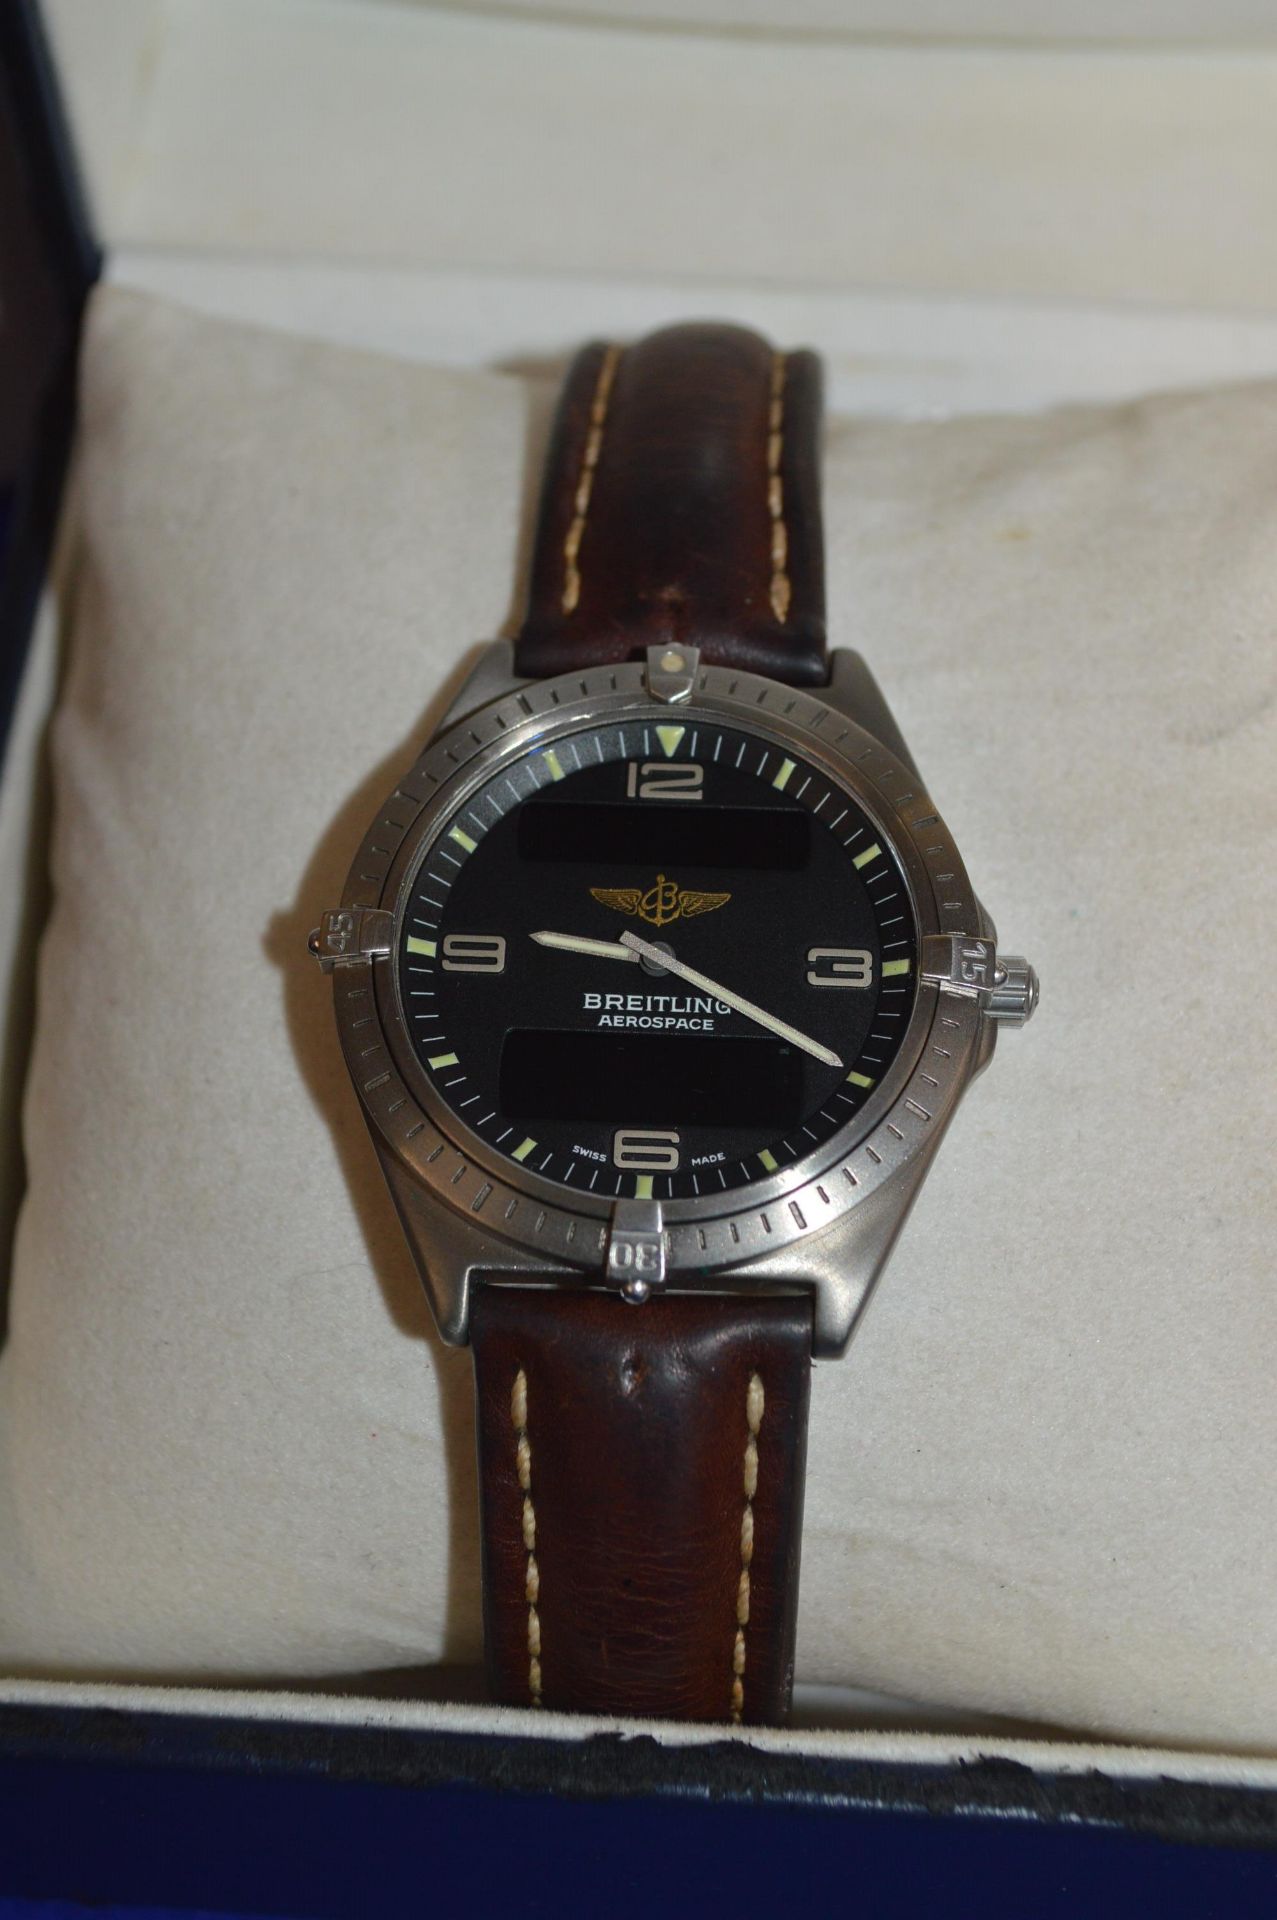 Breitling Aerospace Model: E56061 Gents Titanium Watch on Brown Leather Strap - Image 4 of 9